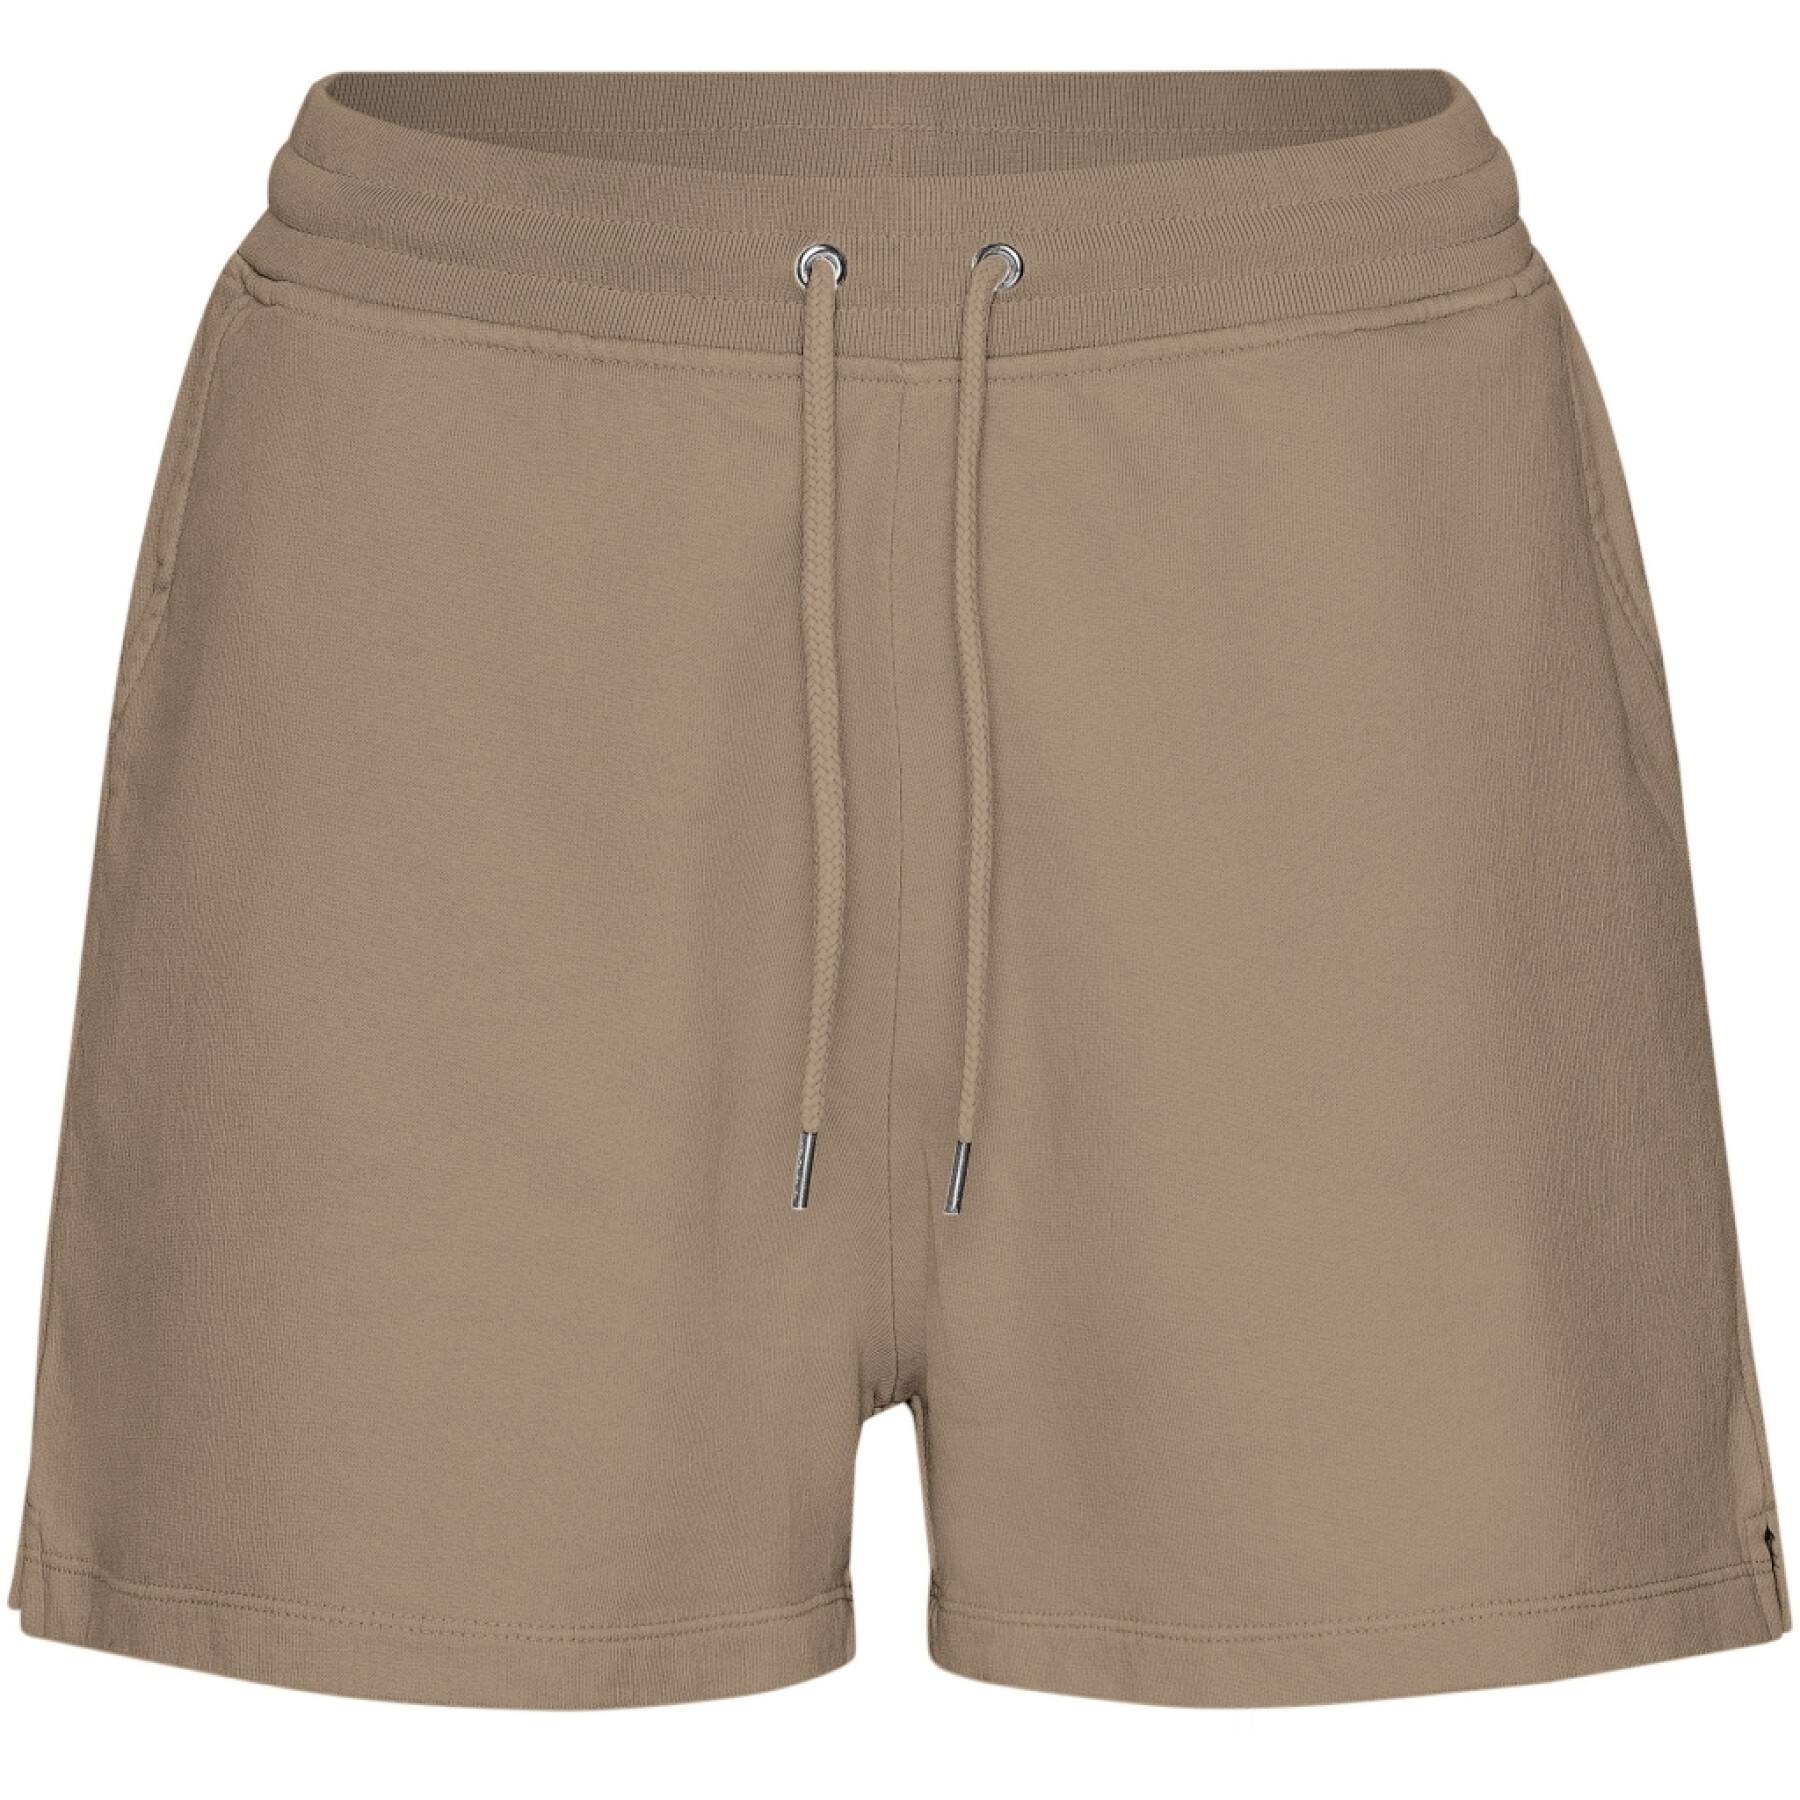 Women's shorts Colorful Standard Organic Warm Taupe